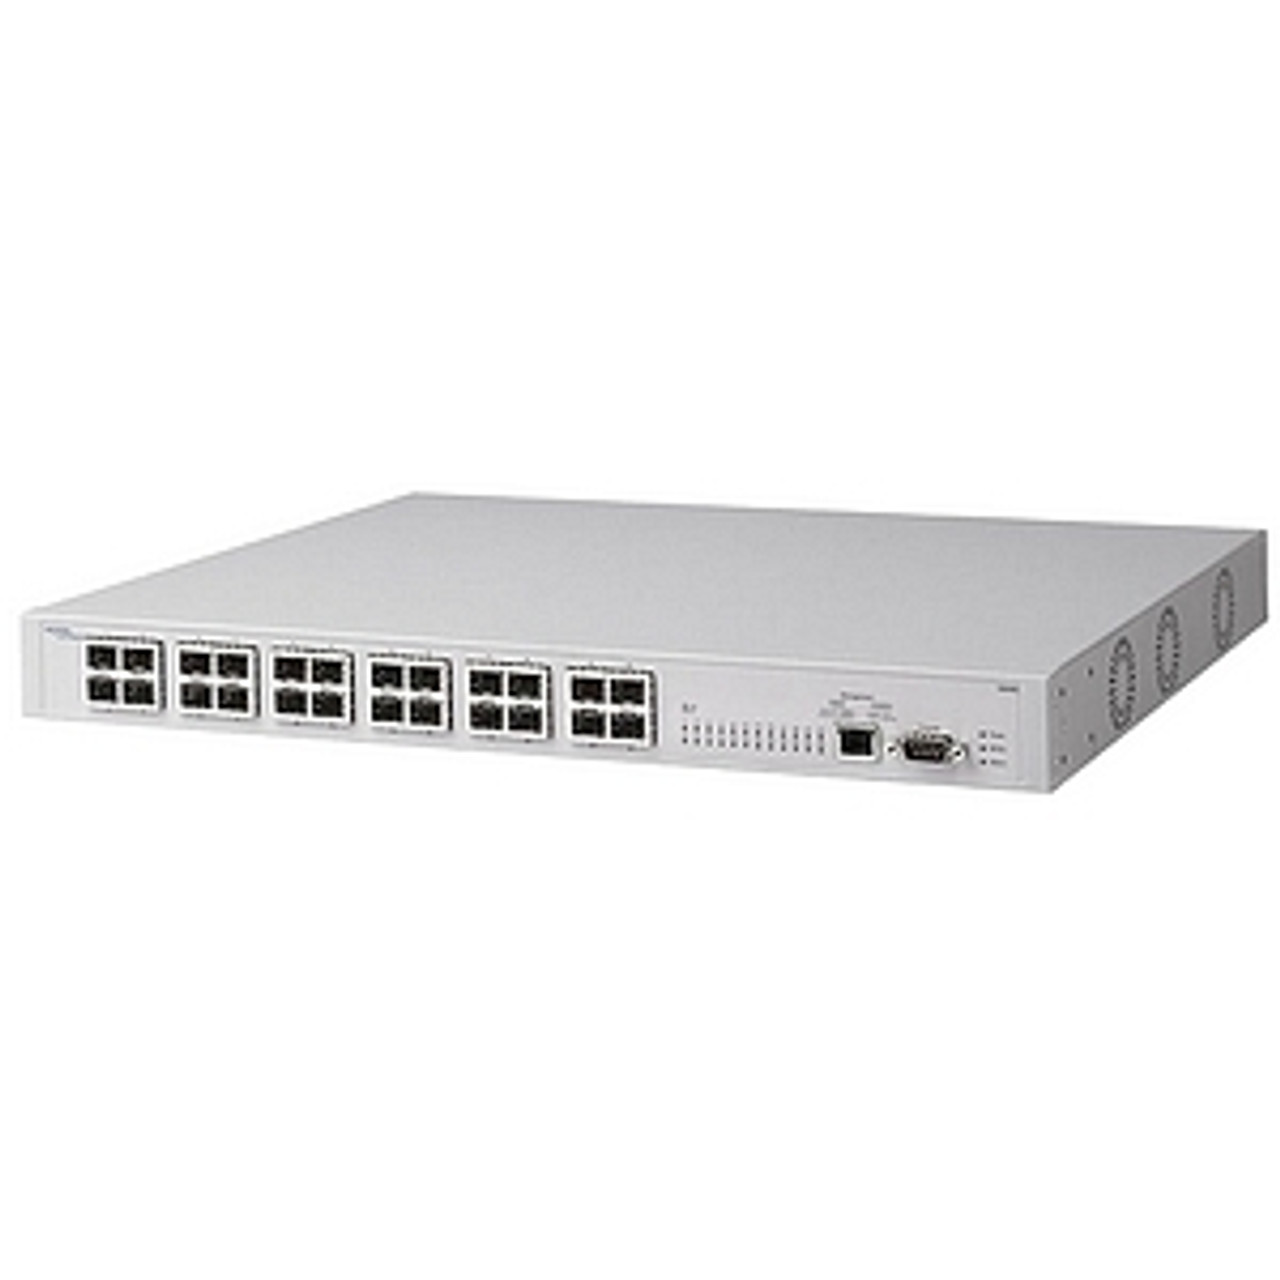 DJ1412A04GS Nortel 1624G Ethernet Routing Switch Federal TAA Edition (Refurbished)